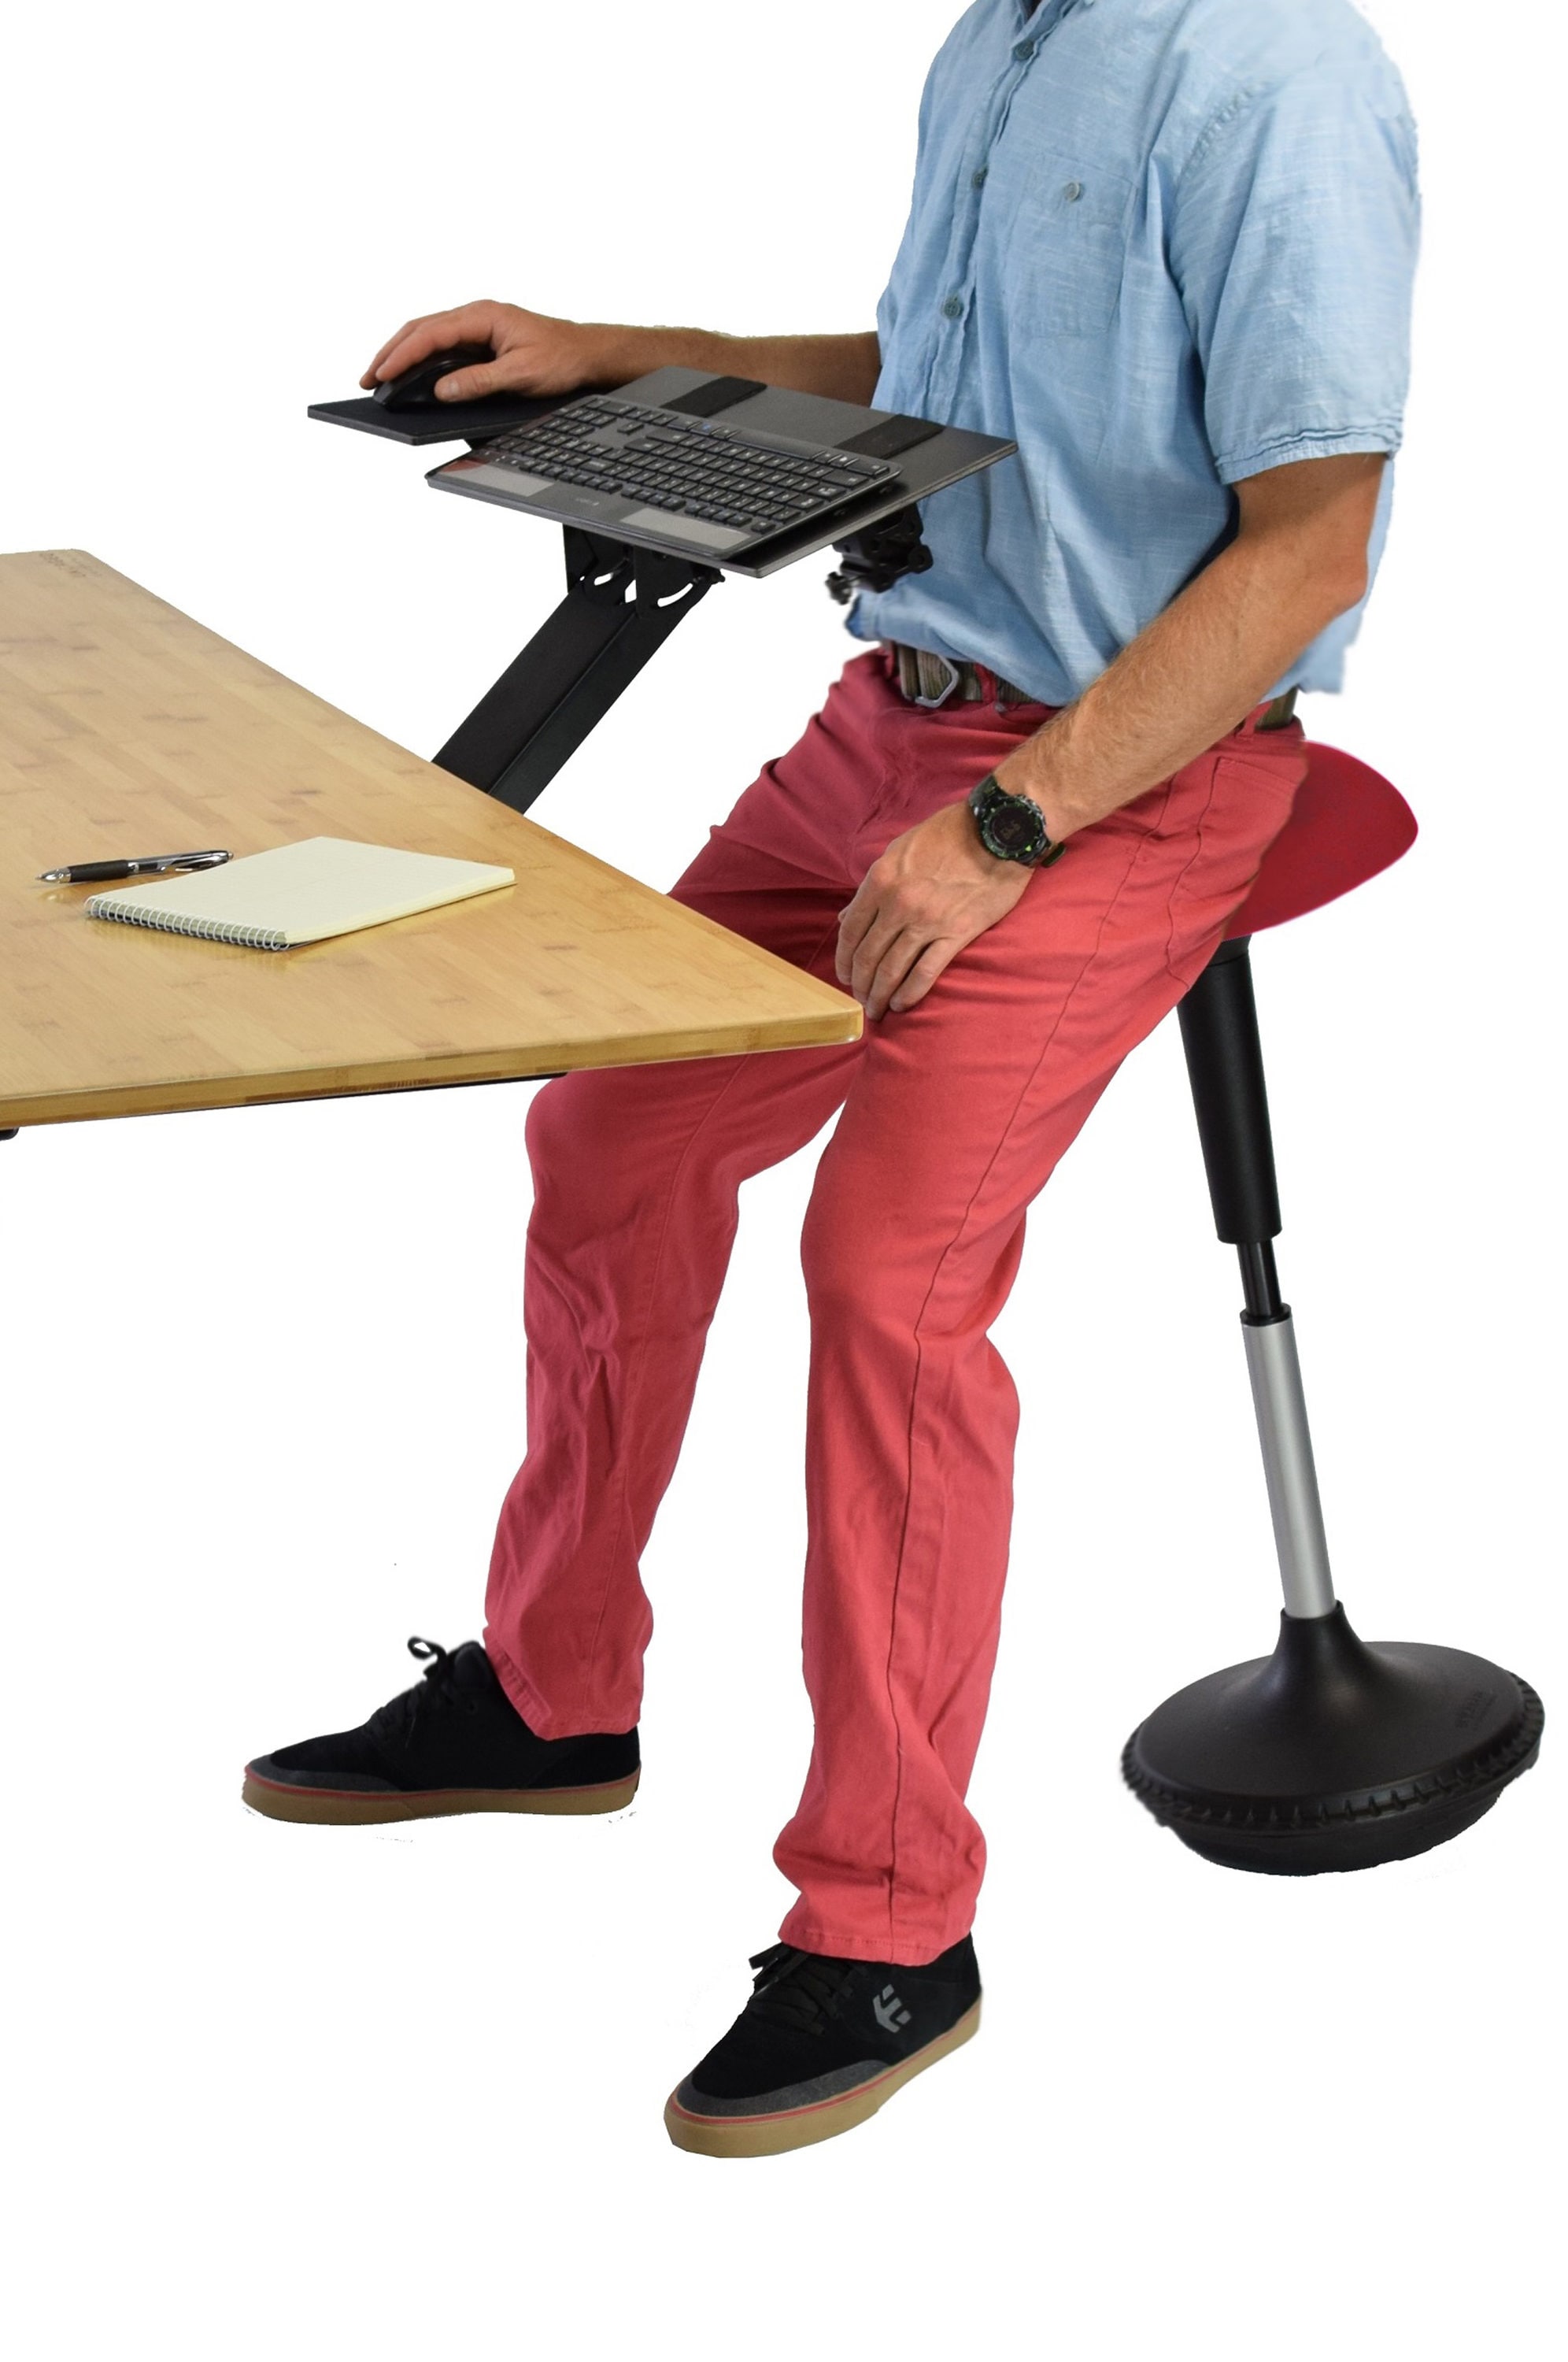 WOBBLE STOOL Active Sitting Office Chair for sit stand up standing desks modern 